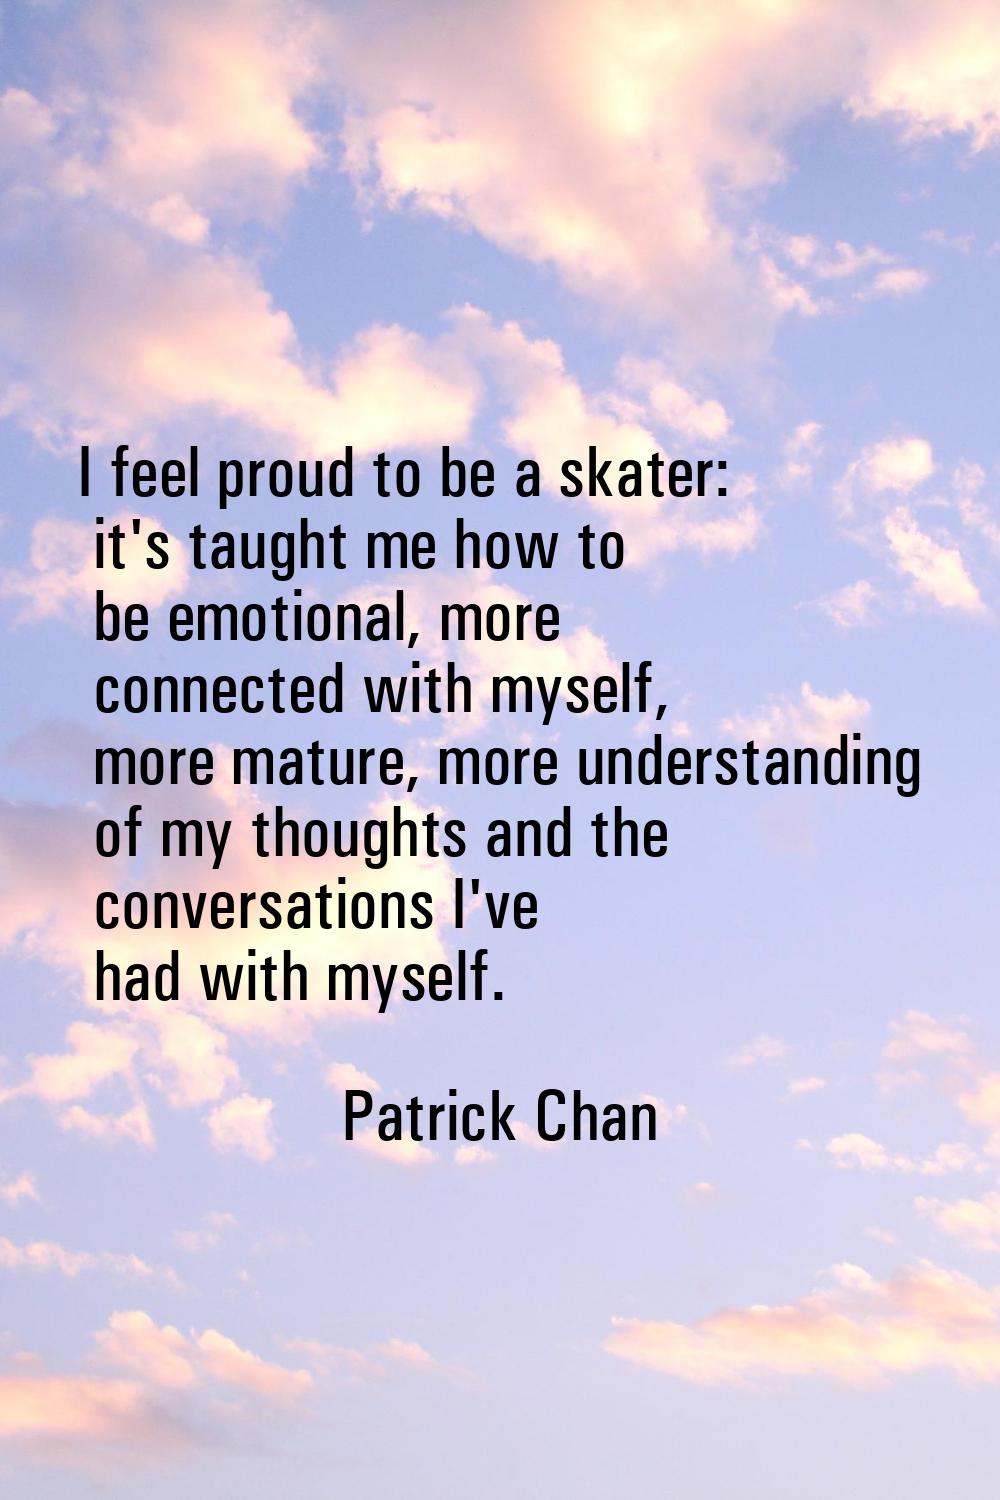 I feel proud to be a skater: it's taught me how to be emotional, more connected with myself, more m